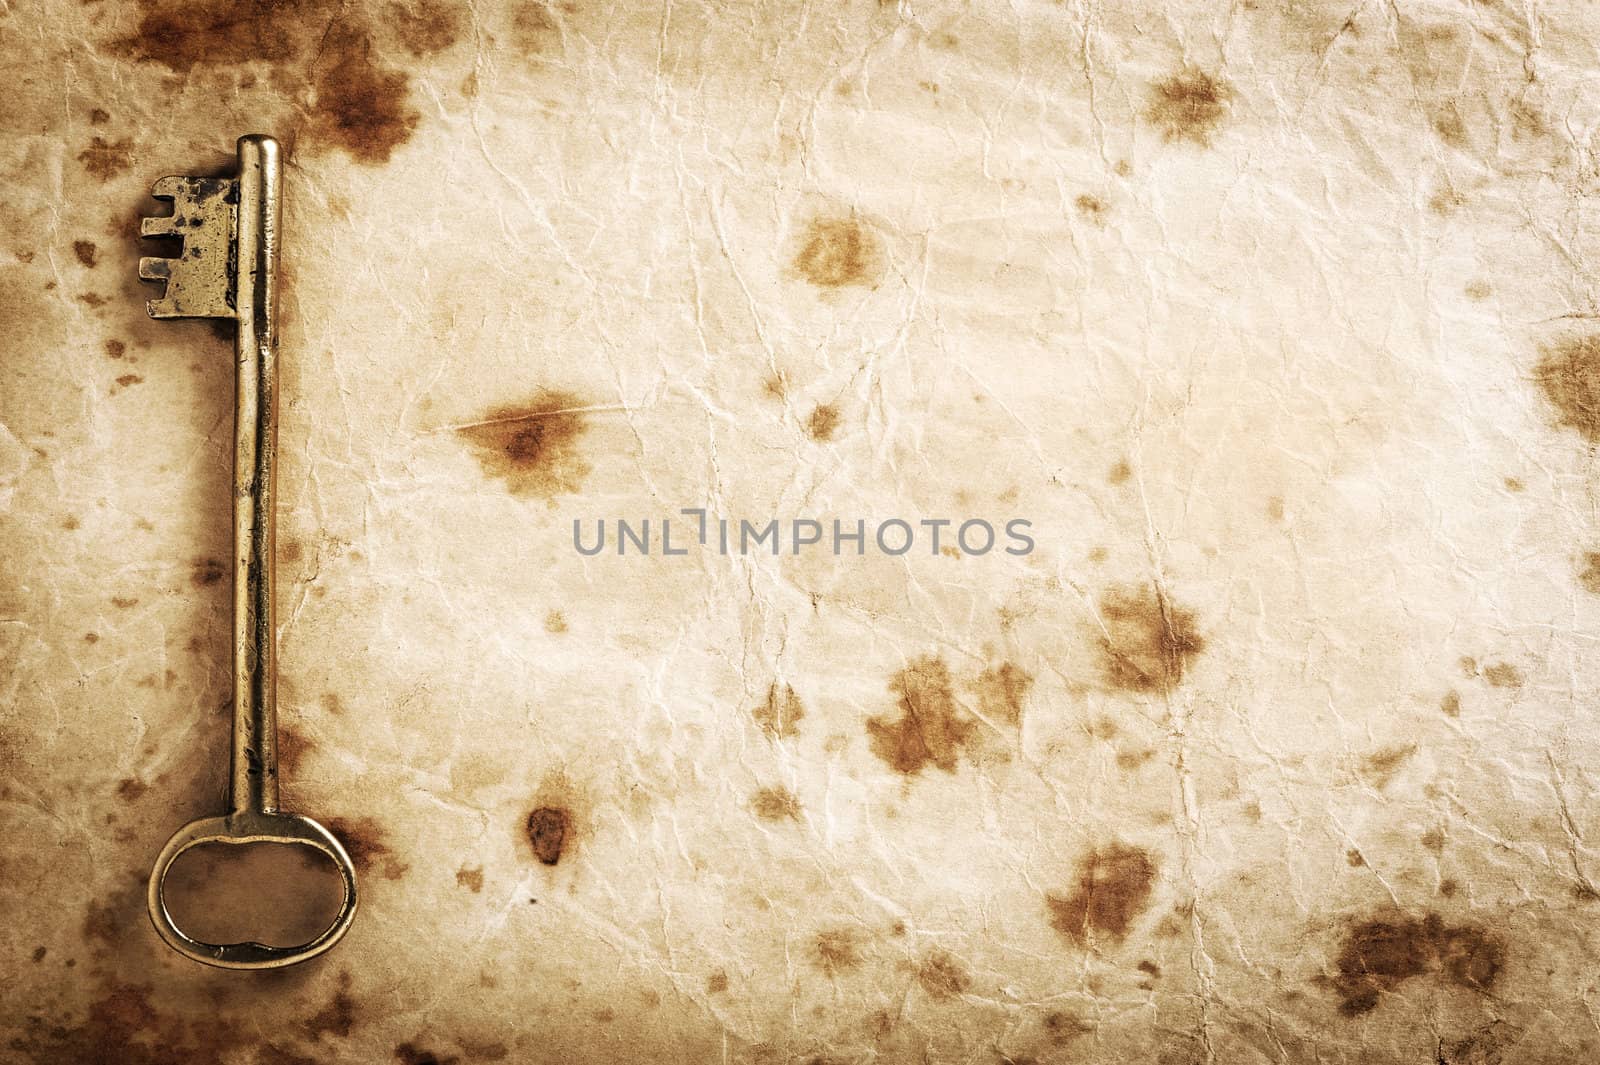 grunge paper background texture with old key